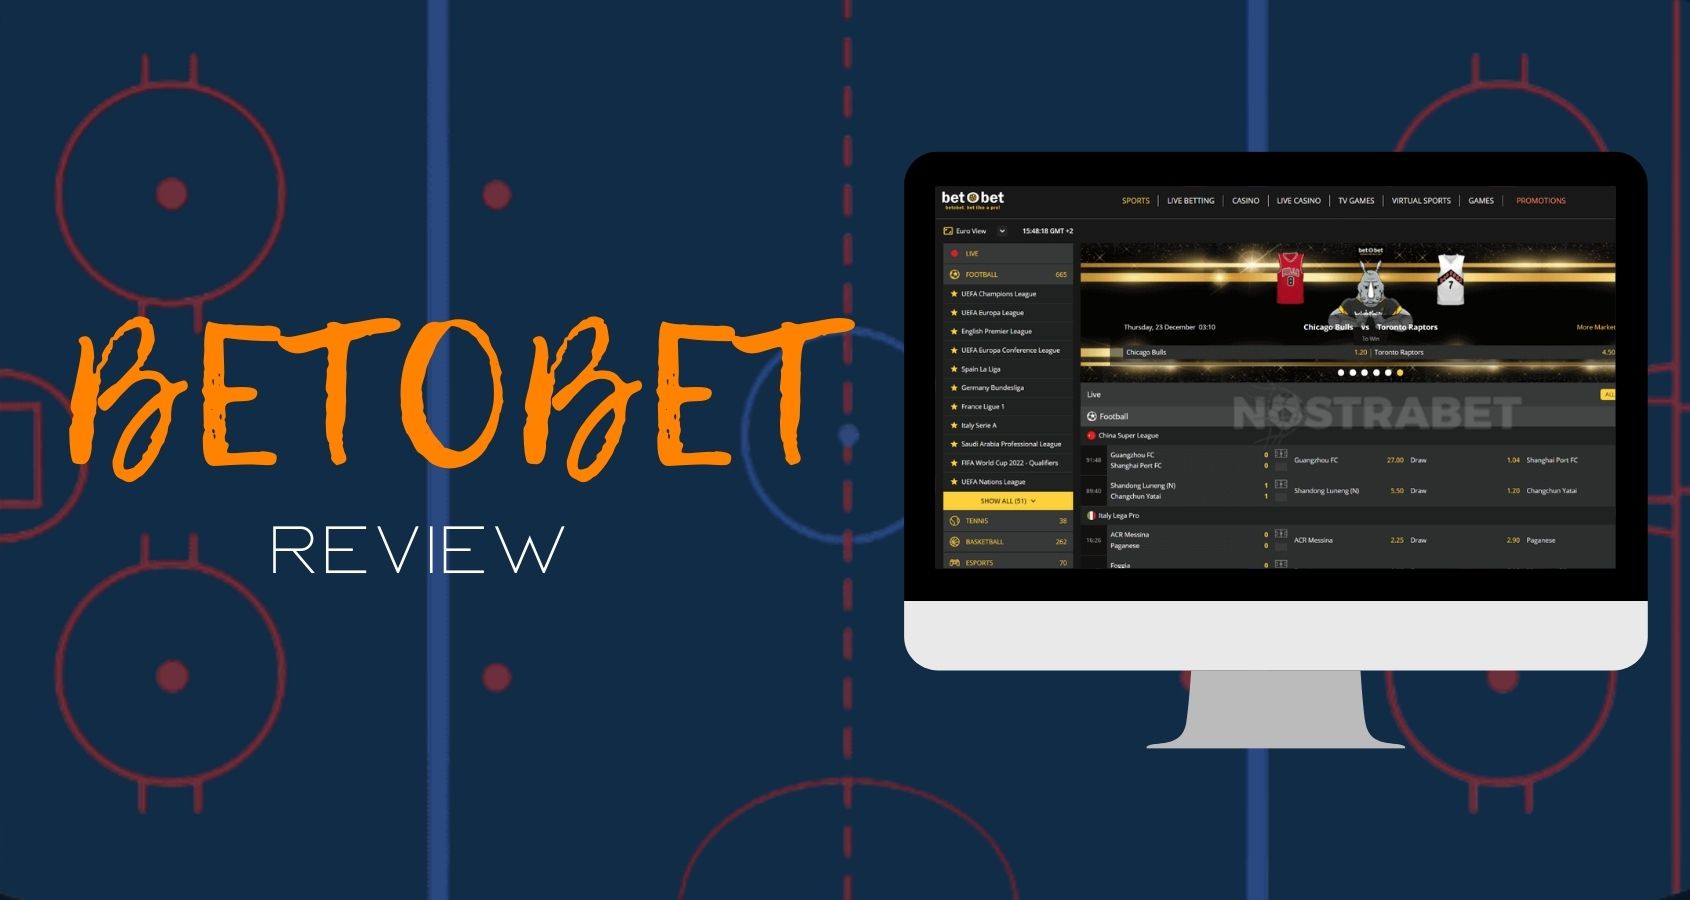 BetObet sports betting options and site overview